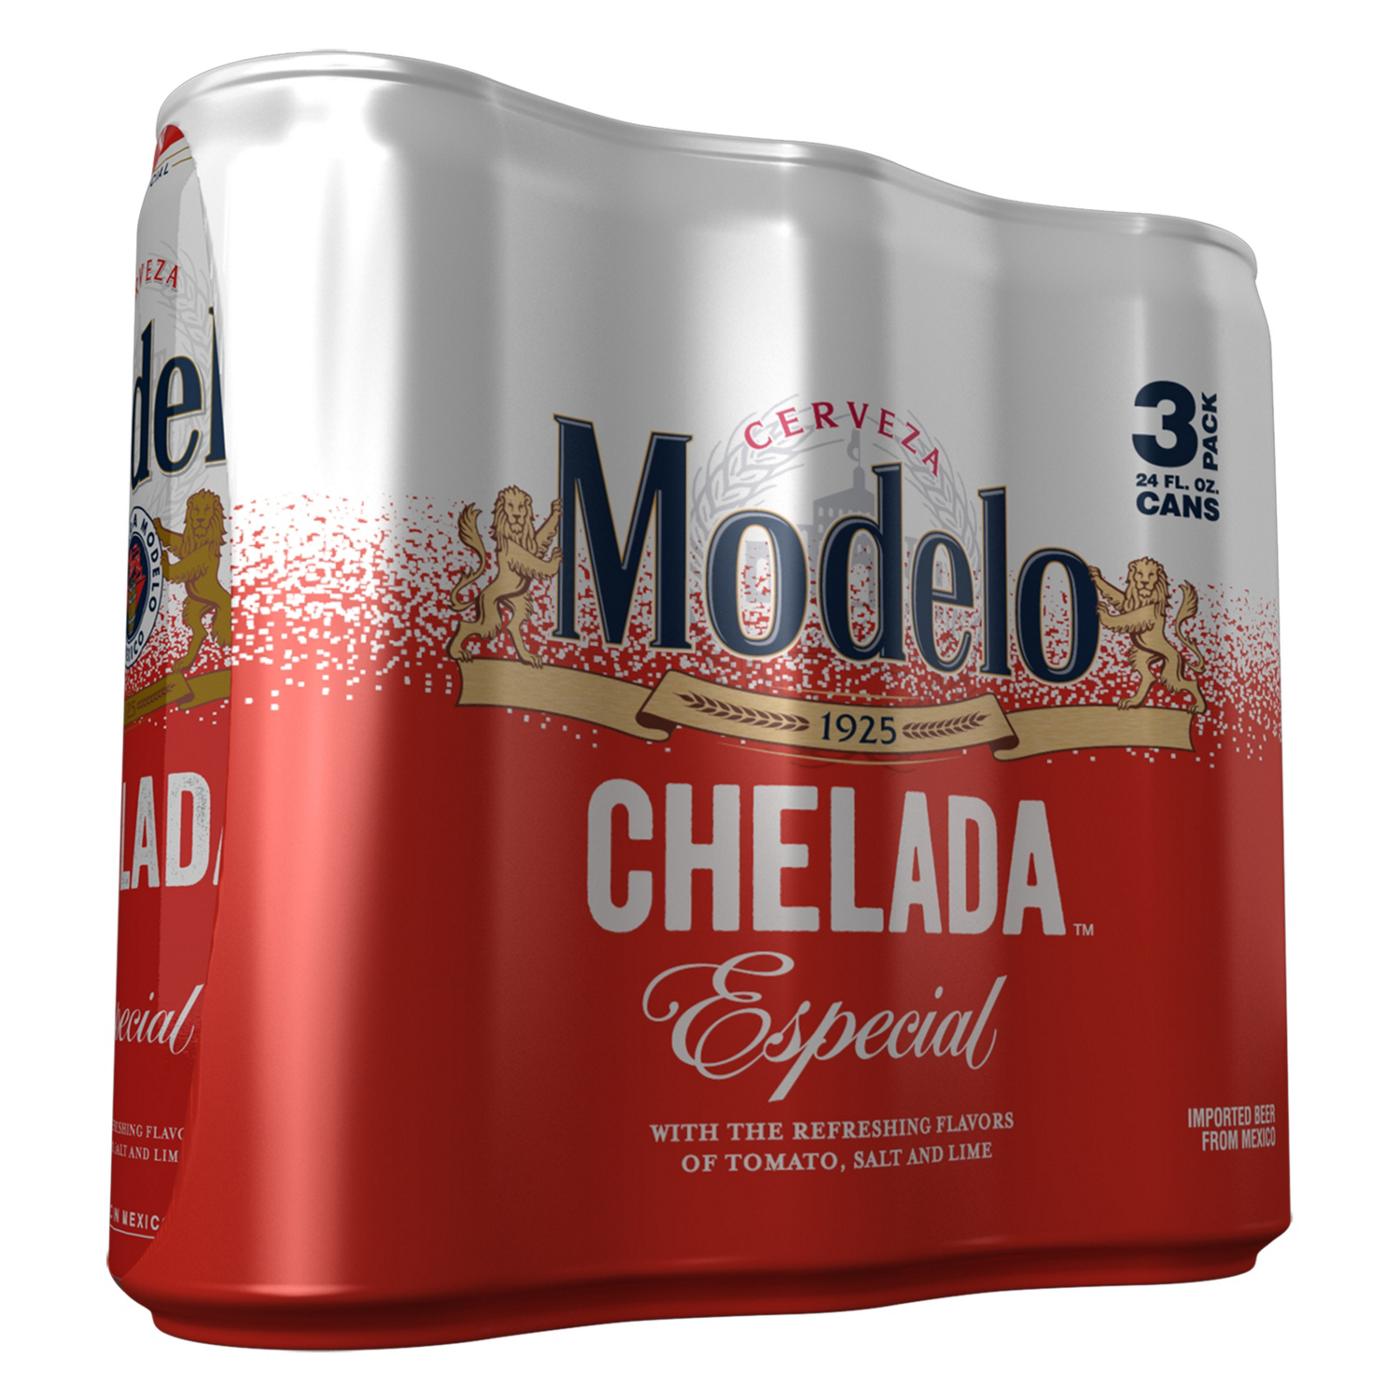 Modelo Chelada Mexican Import Flavored Beer 24 oz Cans, 3 pk; image 1 of 10